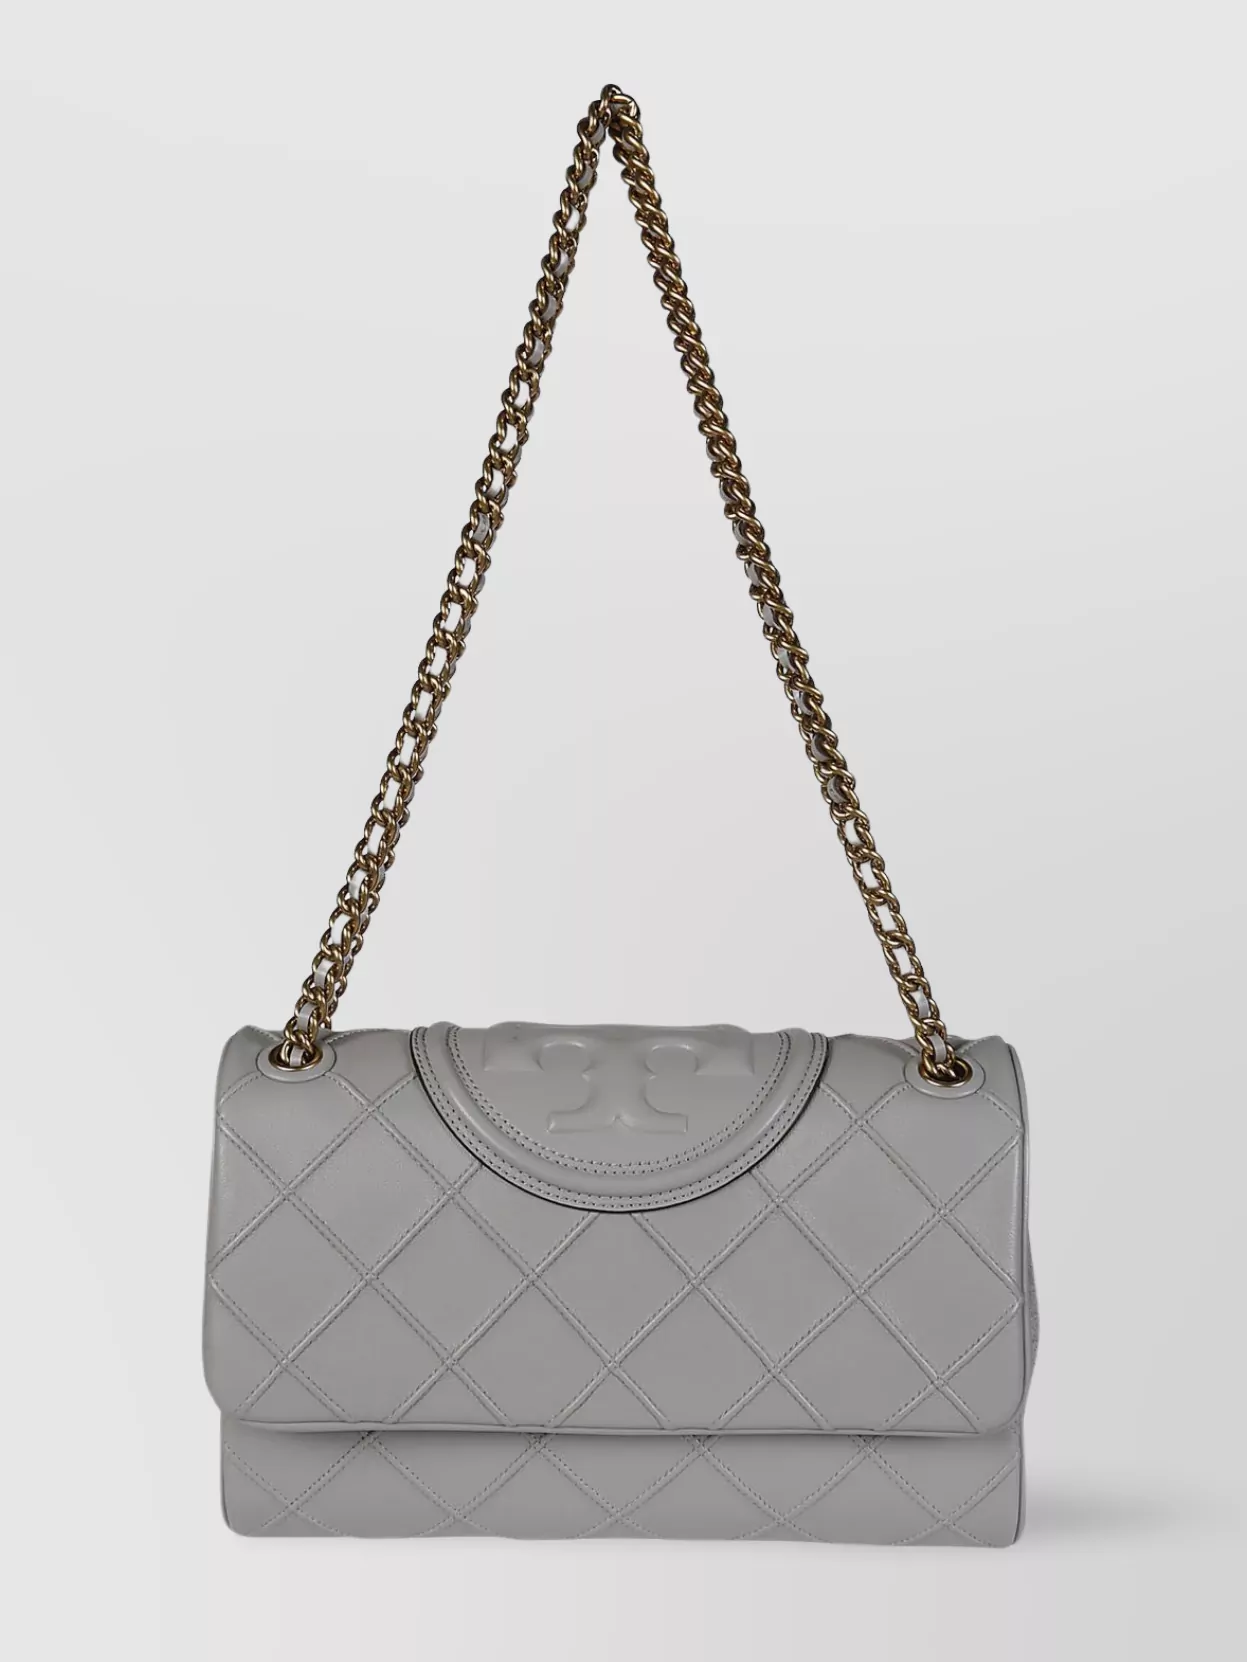 TORY BURCH SOFT QUILTED CHAIN SHOULDER BAG